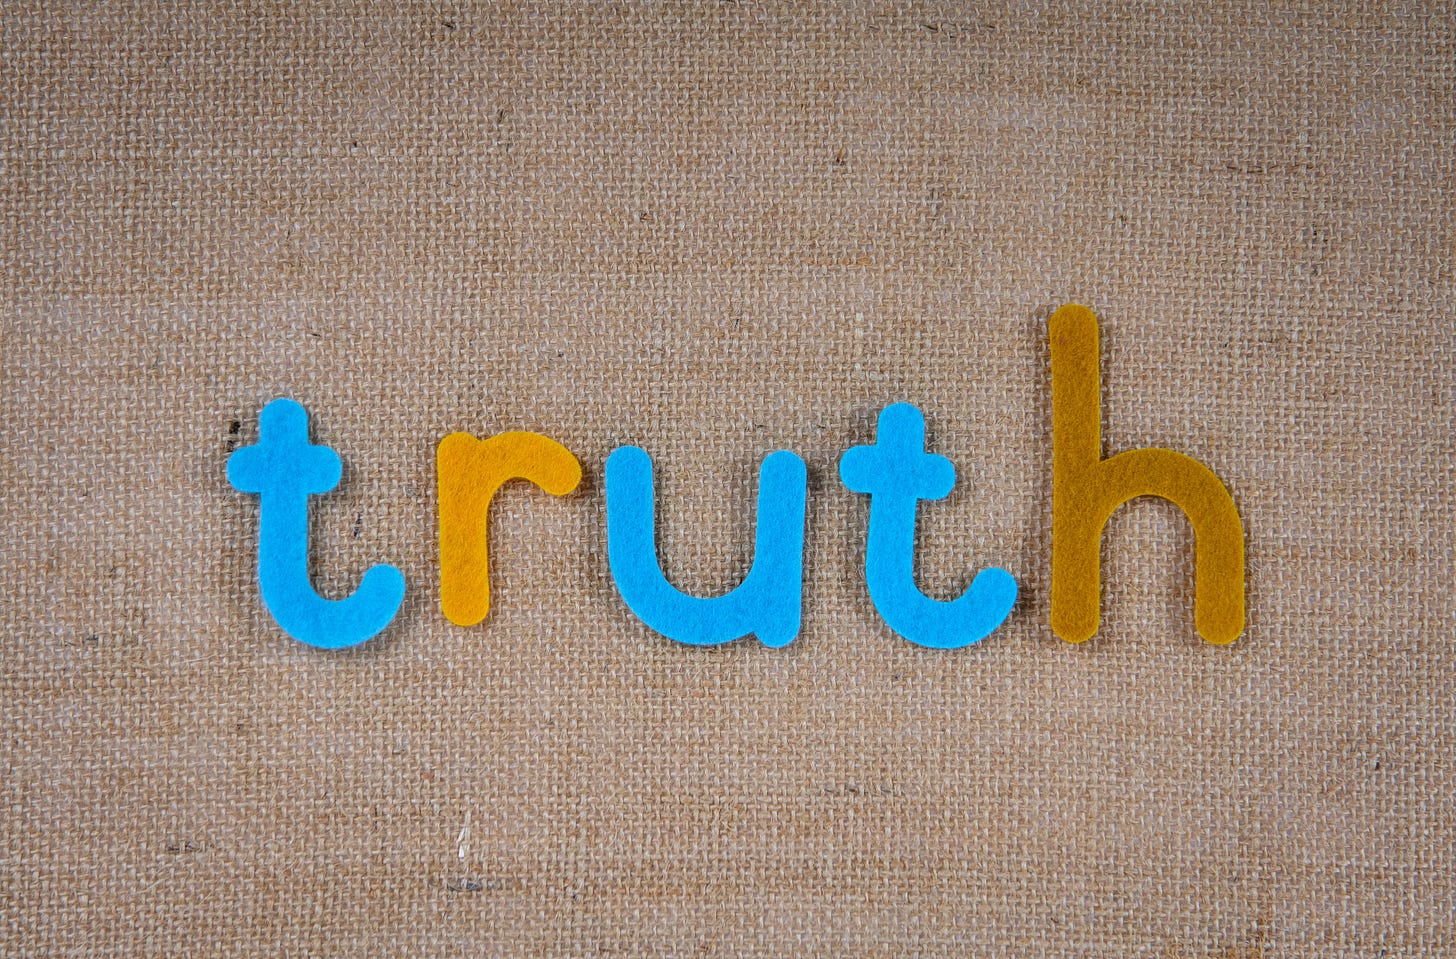 The word truth appears in light blue and dark yellow fabric (felt) letters on a tan burlap looking surface.